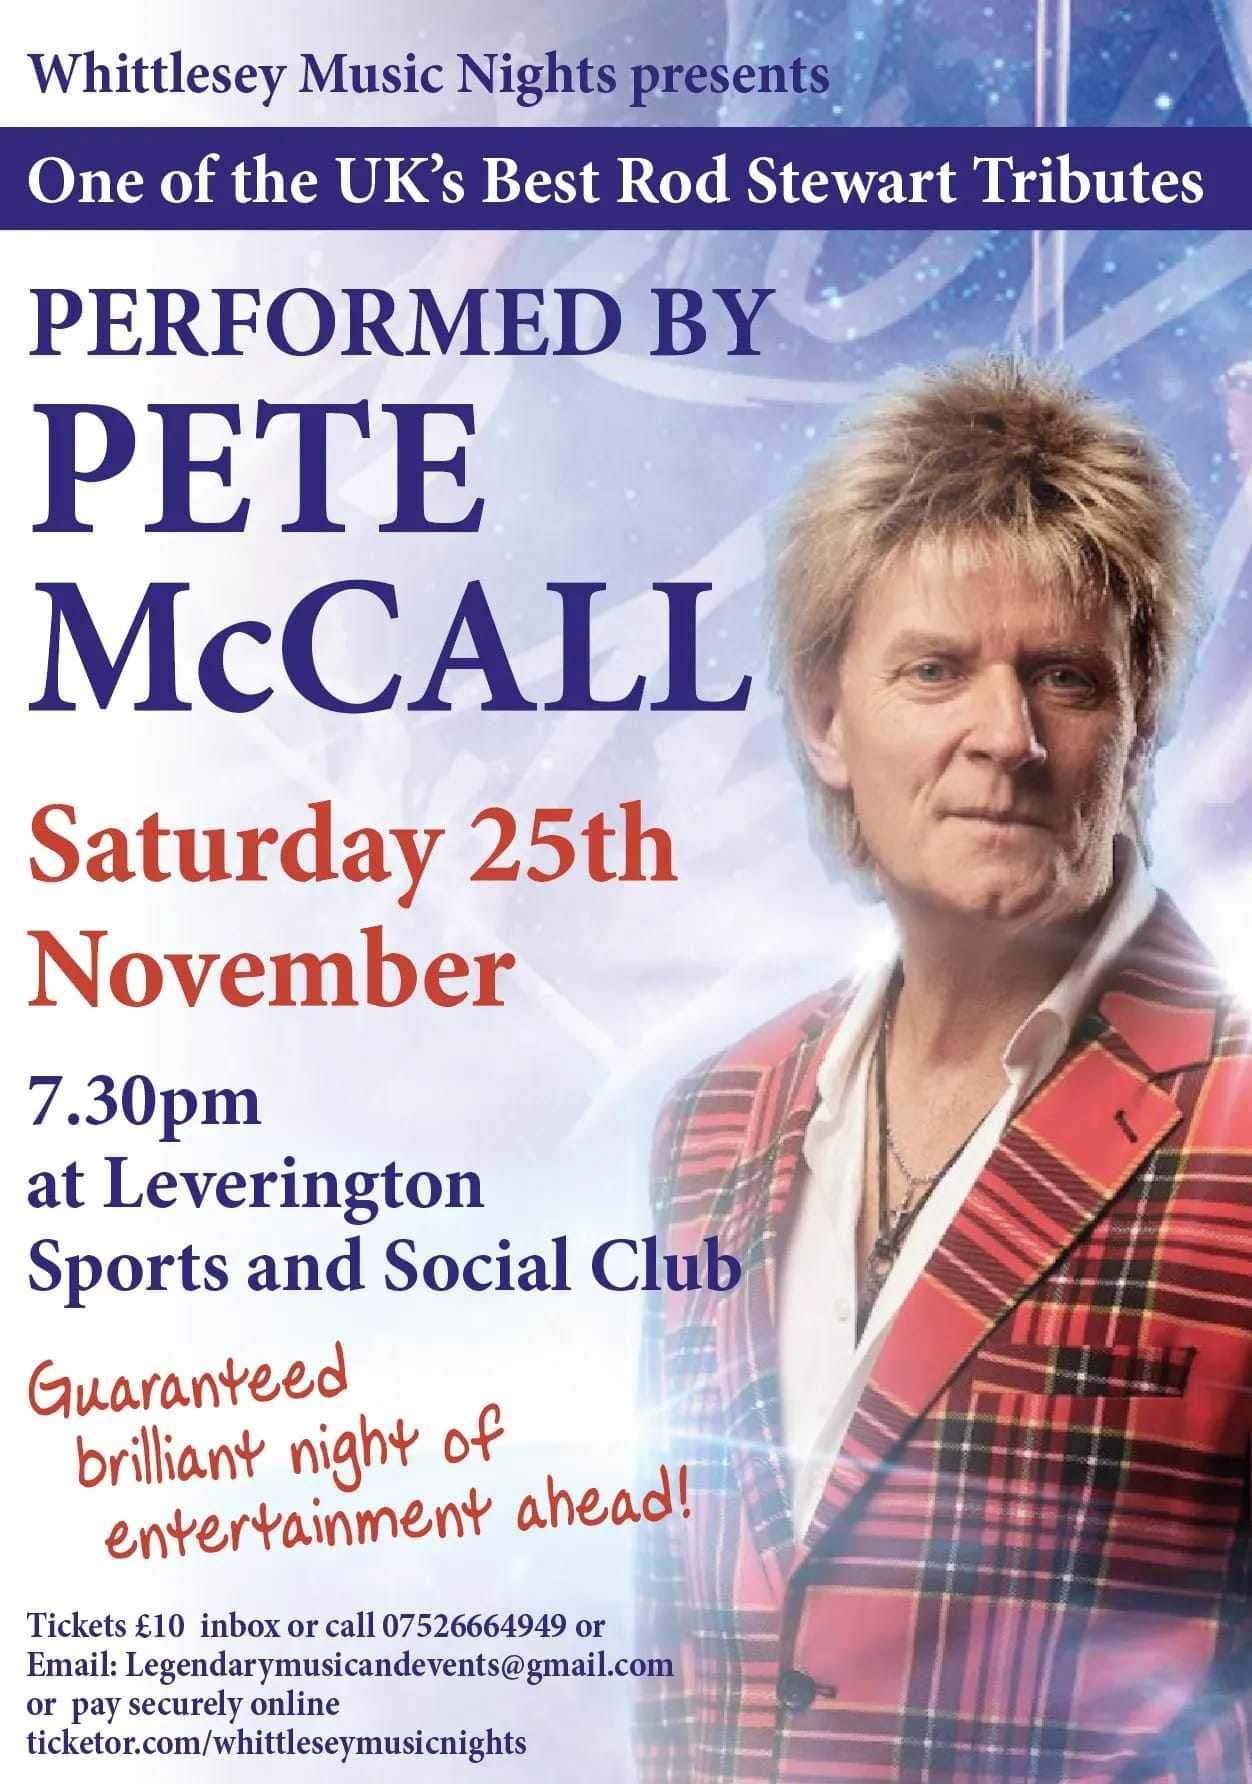 Rod Stewart Tribute  on Nov 25, 19:30@Leverington Sports and Social Club - Buy tickets and Get information on whittlesey music nights 